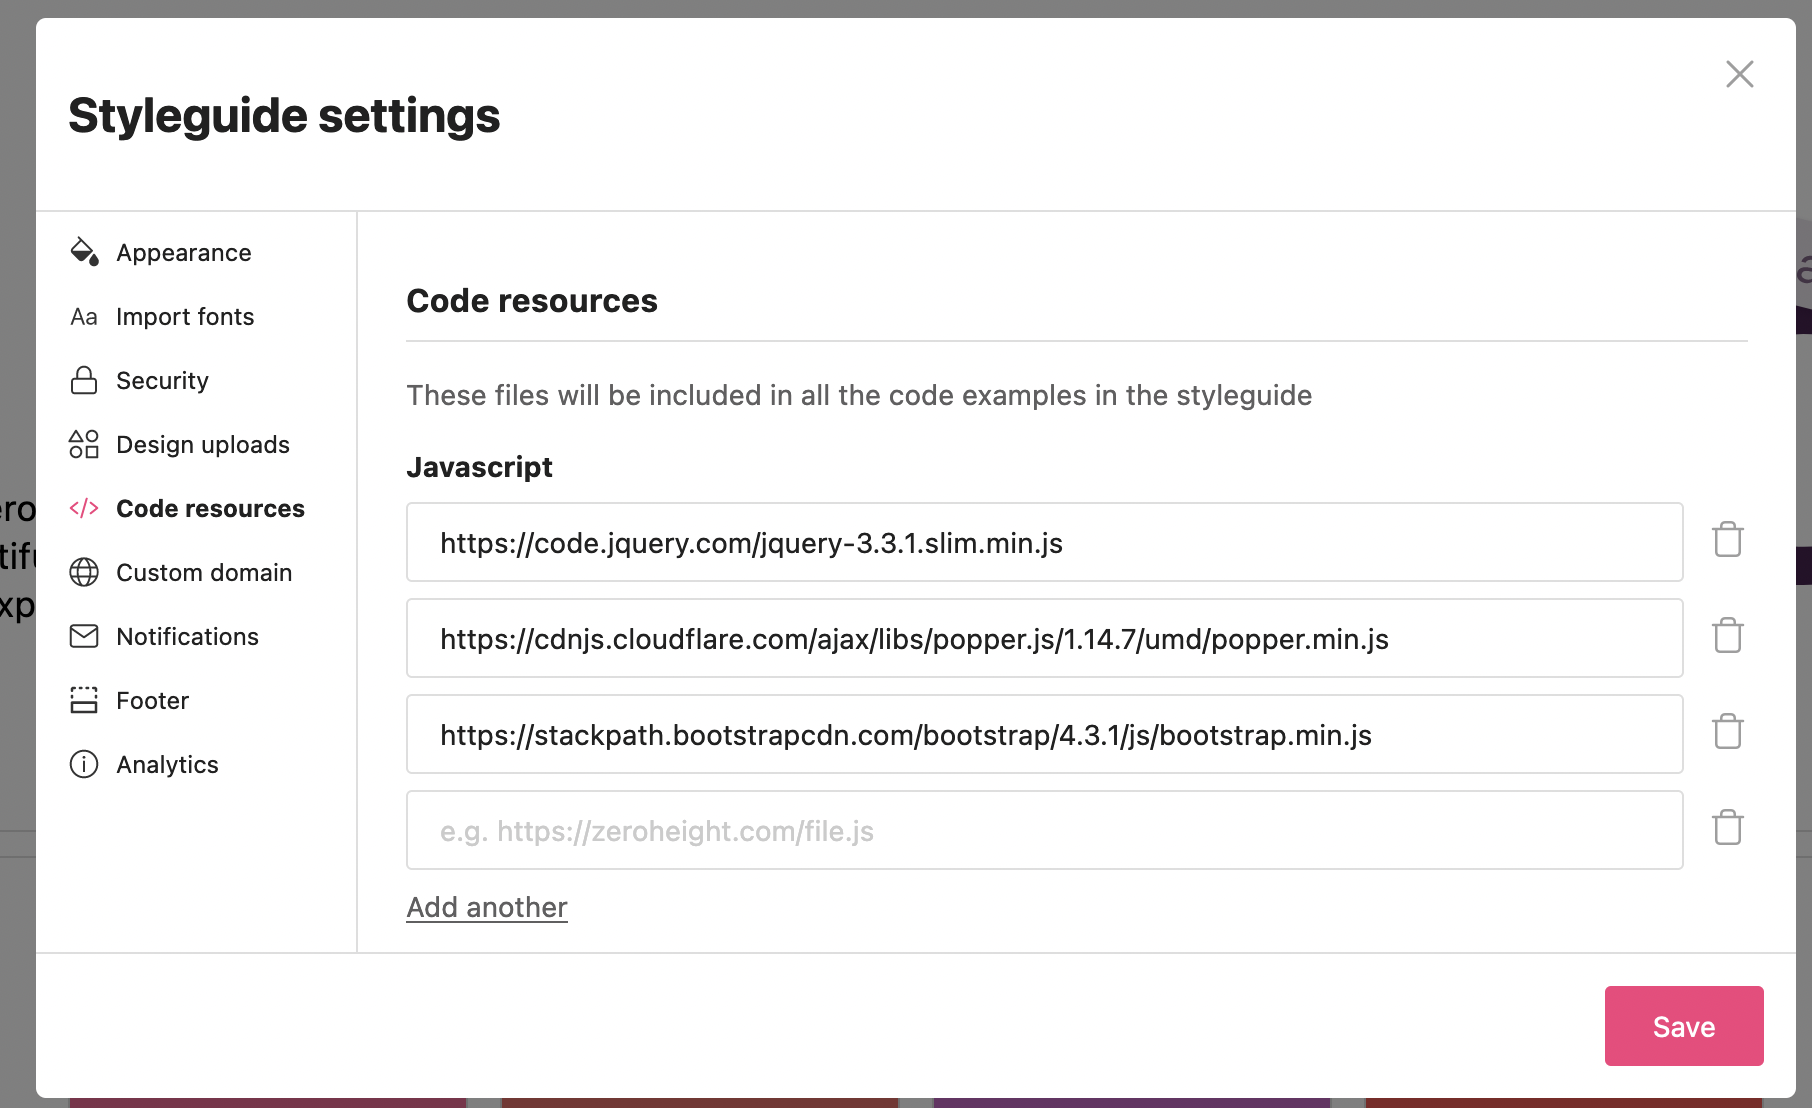 Code resources section in the styleguide settings